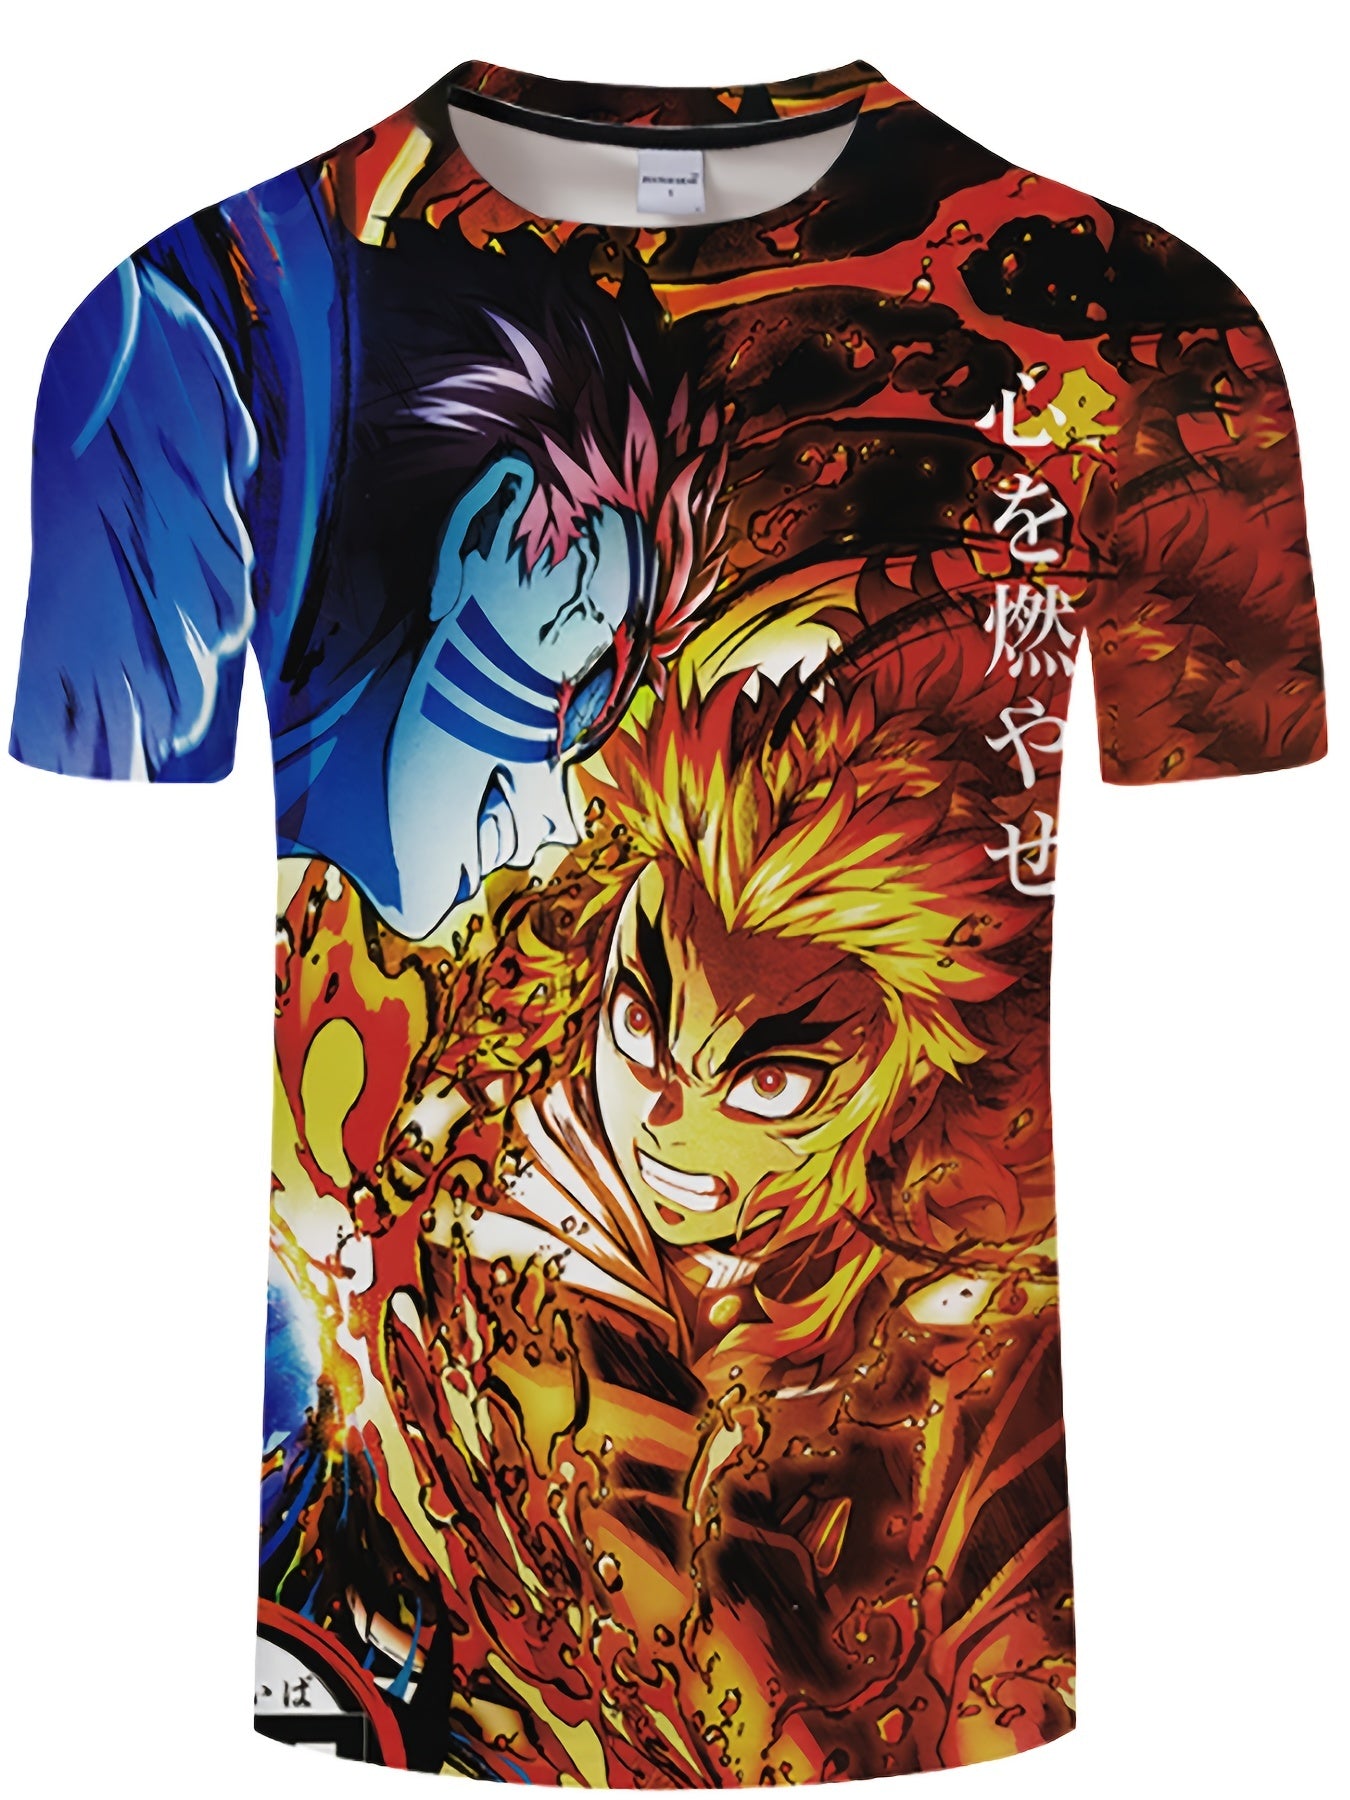 Plus Size Men's 3D Pattern Anime Graphic Tees For Male, Comfy Stretch Short Sleeve T-shirts, Oversized Loose Men's Clothings - Rexpect Nerd